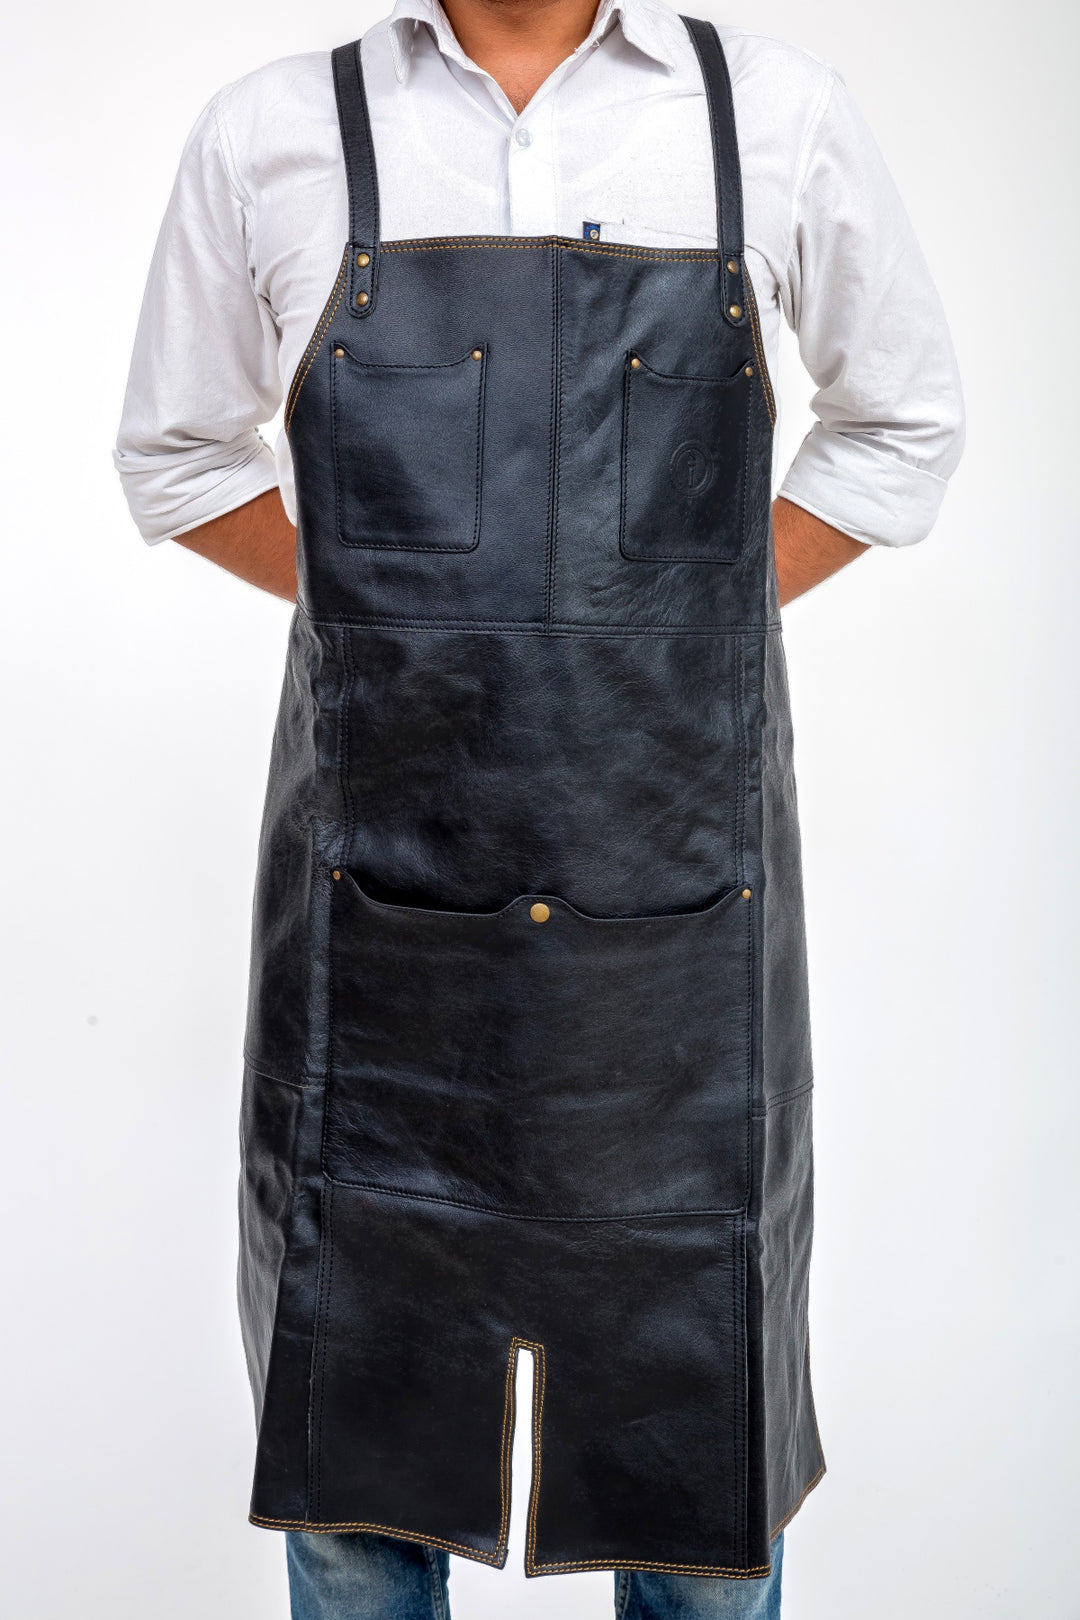 Indepal - Oliver Leather Apron in Black Leather | Buster McGee Daylesford